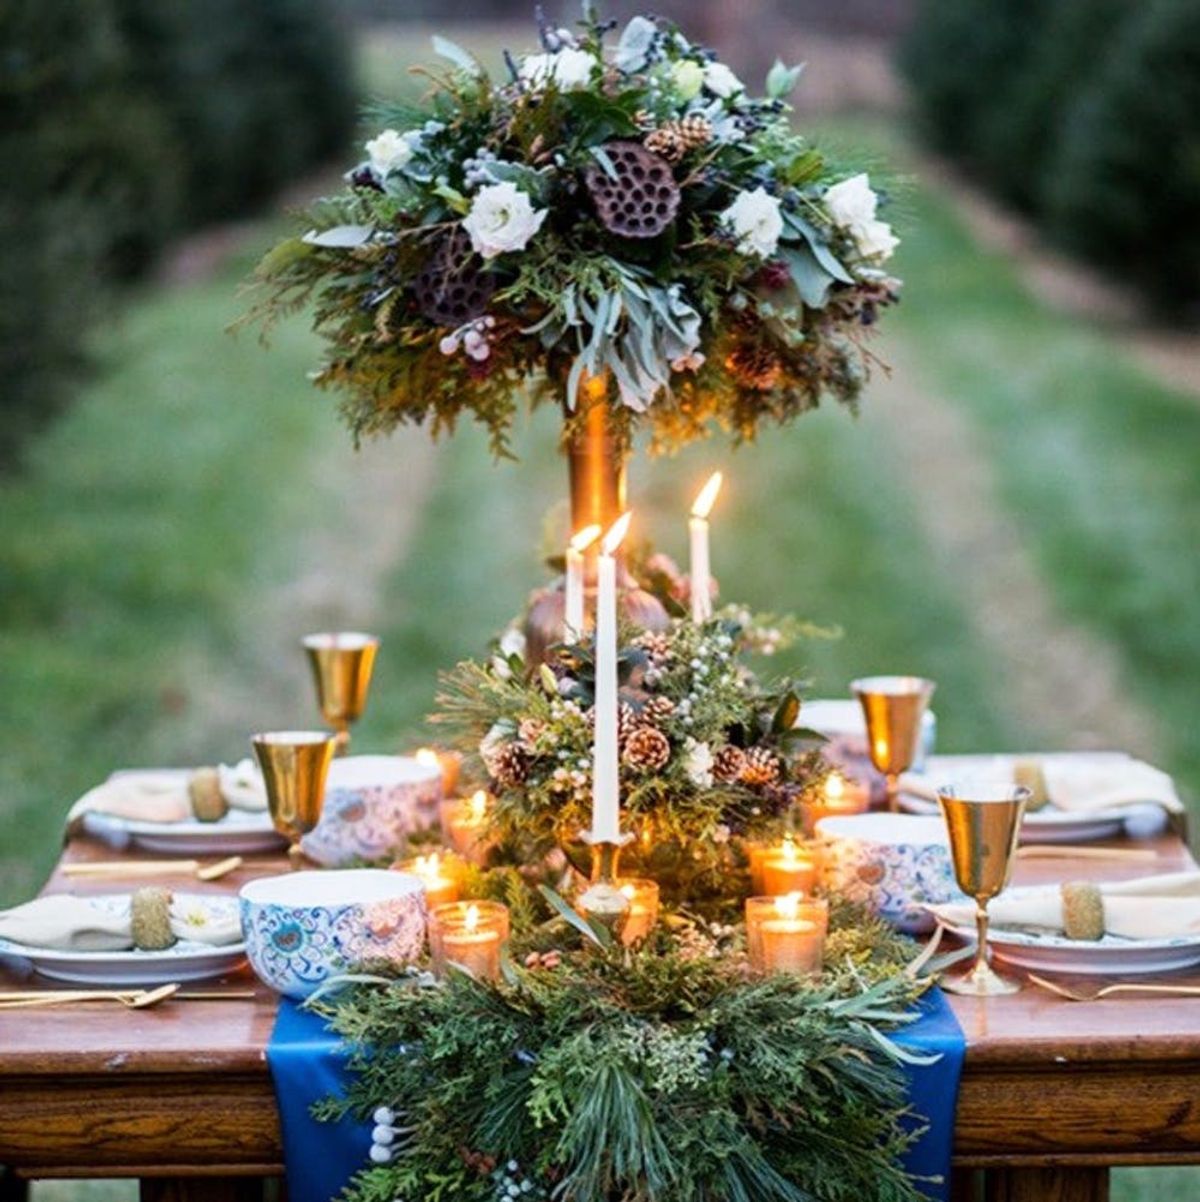 17 Chic Winter Wedding Tablescapes You’ll Melt Over